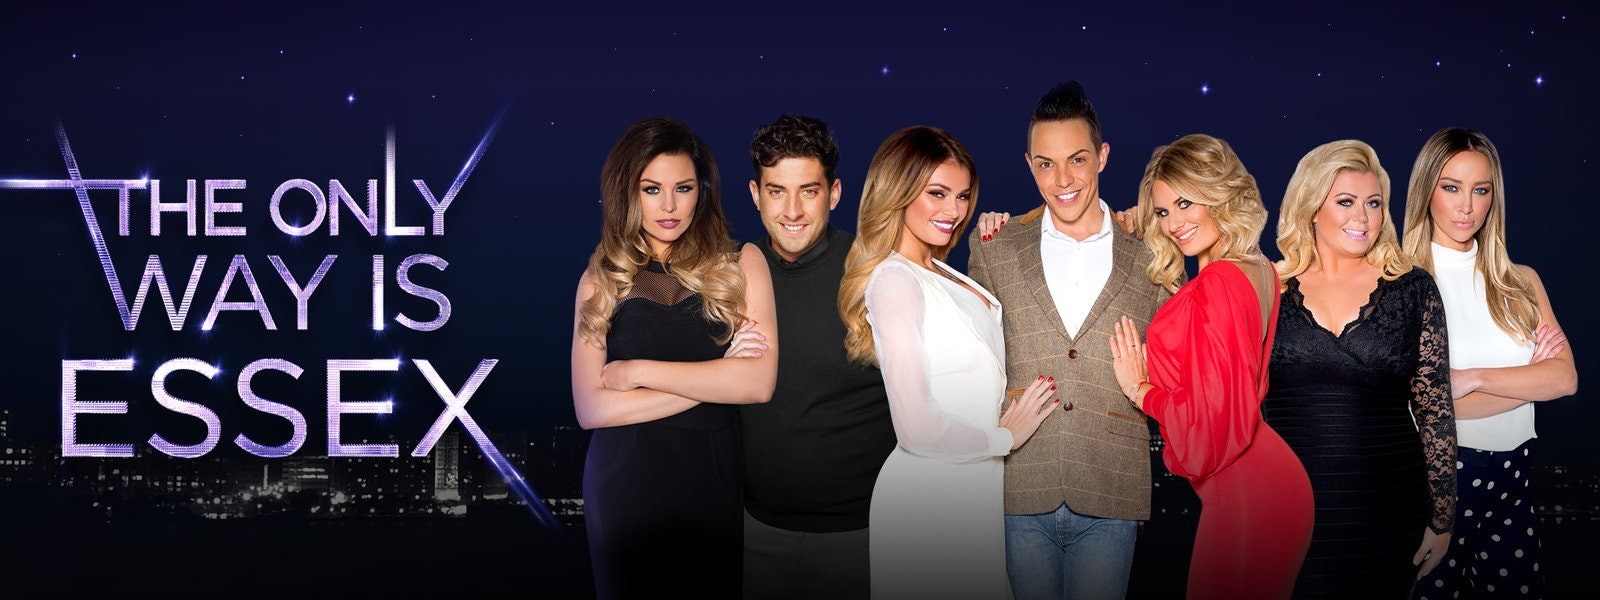 The only way is Essex. Like show шоу. TOWIE. Only way is Essex ITV London. The only way we